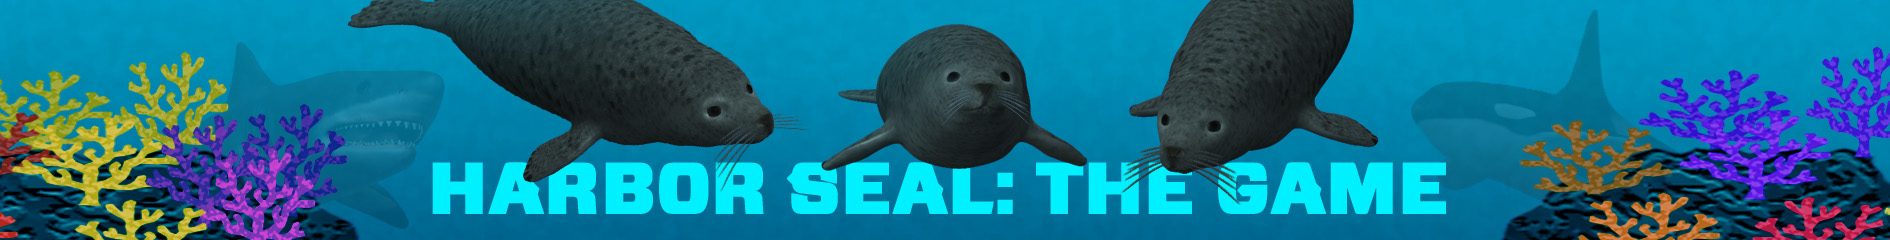 Harbor Seal: The Game